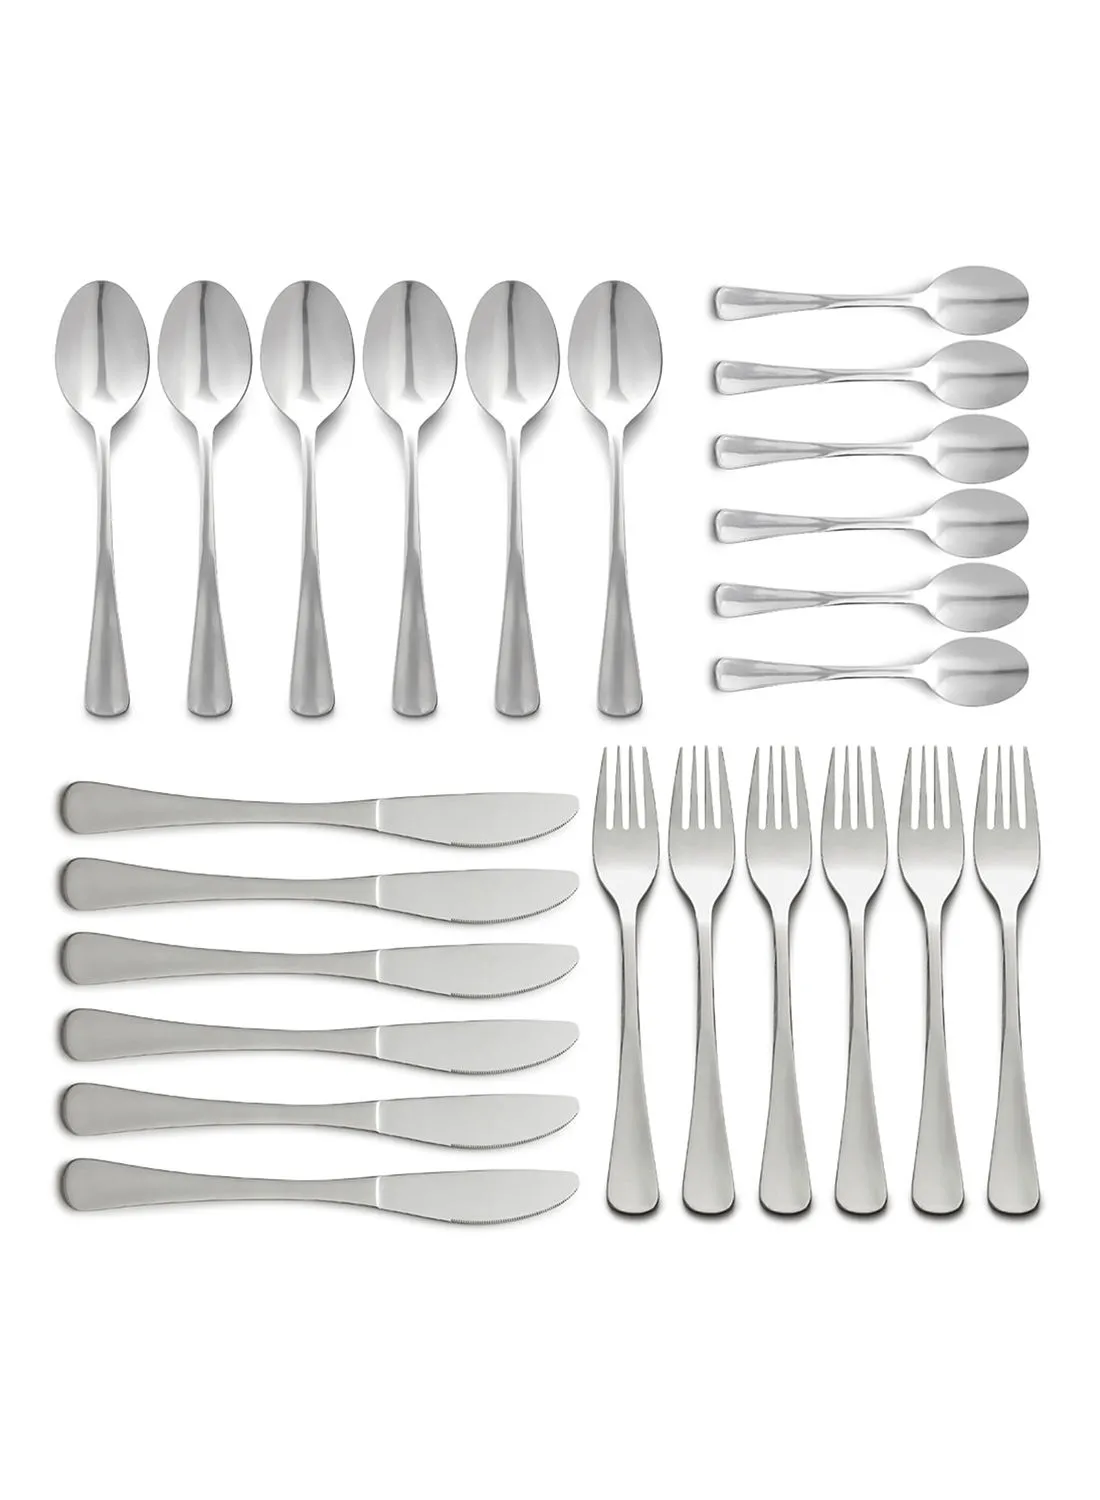 noon east 24 Piece Cutlery Set - Made Of Stainless Steel - Silverware Flatware - Spoons And Forks Set, Spoon Set - Table Spoons, Tea Spoons, Forks, Knives - Serves 6 - Design Silver Allegro